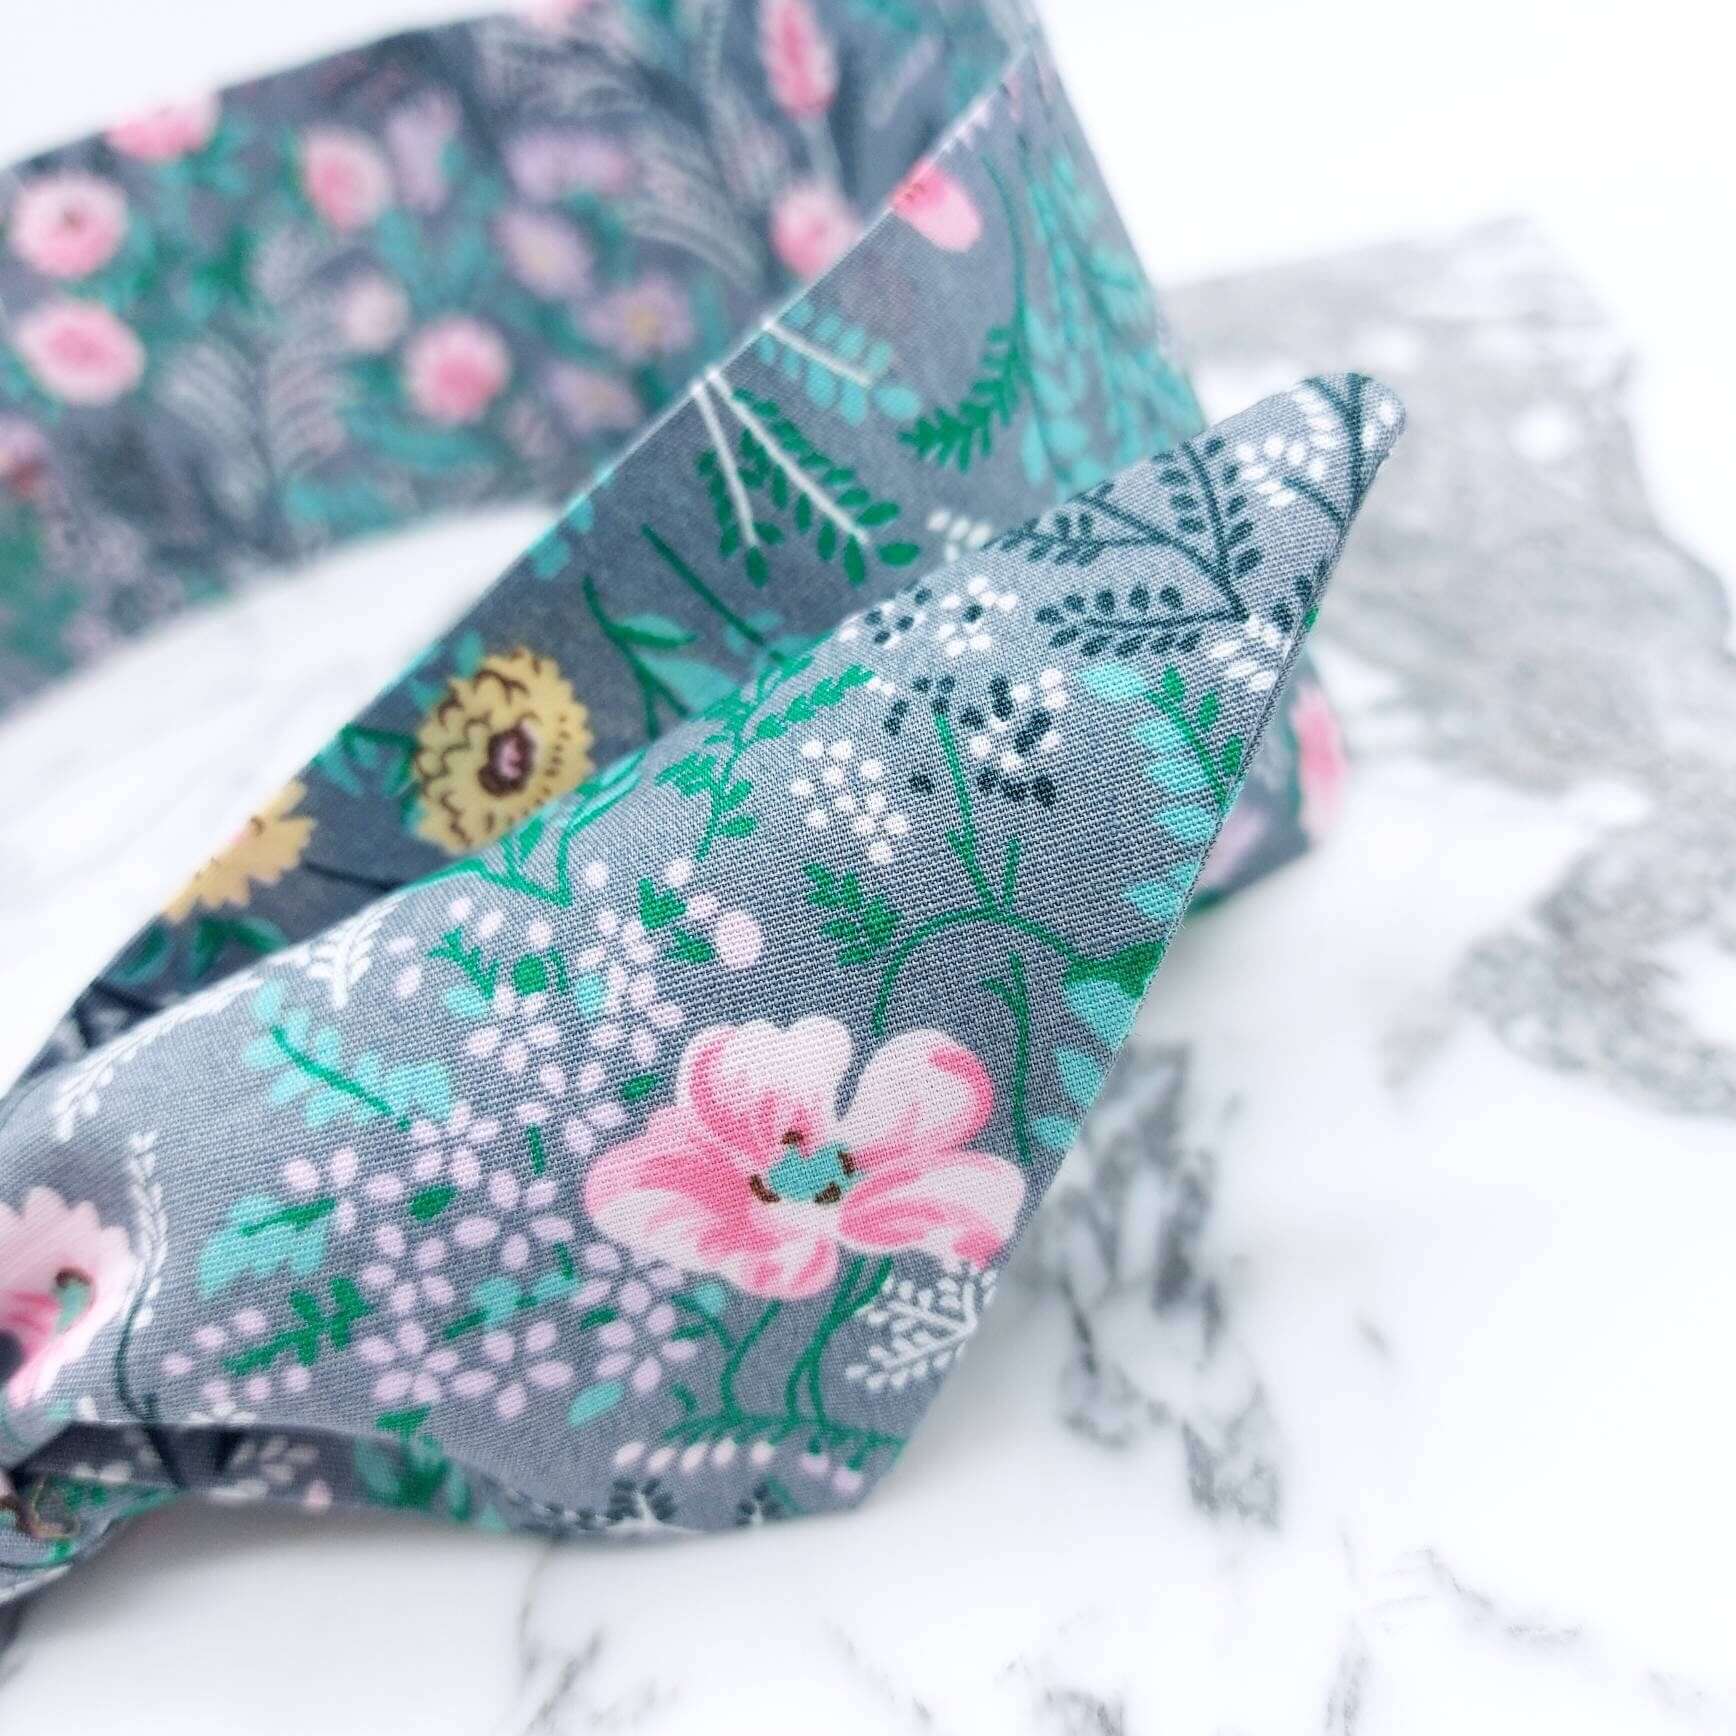 A summery, pale grey, ditsy floral cotton headscarf with tiny pink and green flowers, tied in a pretty knot..